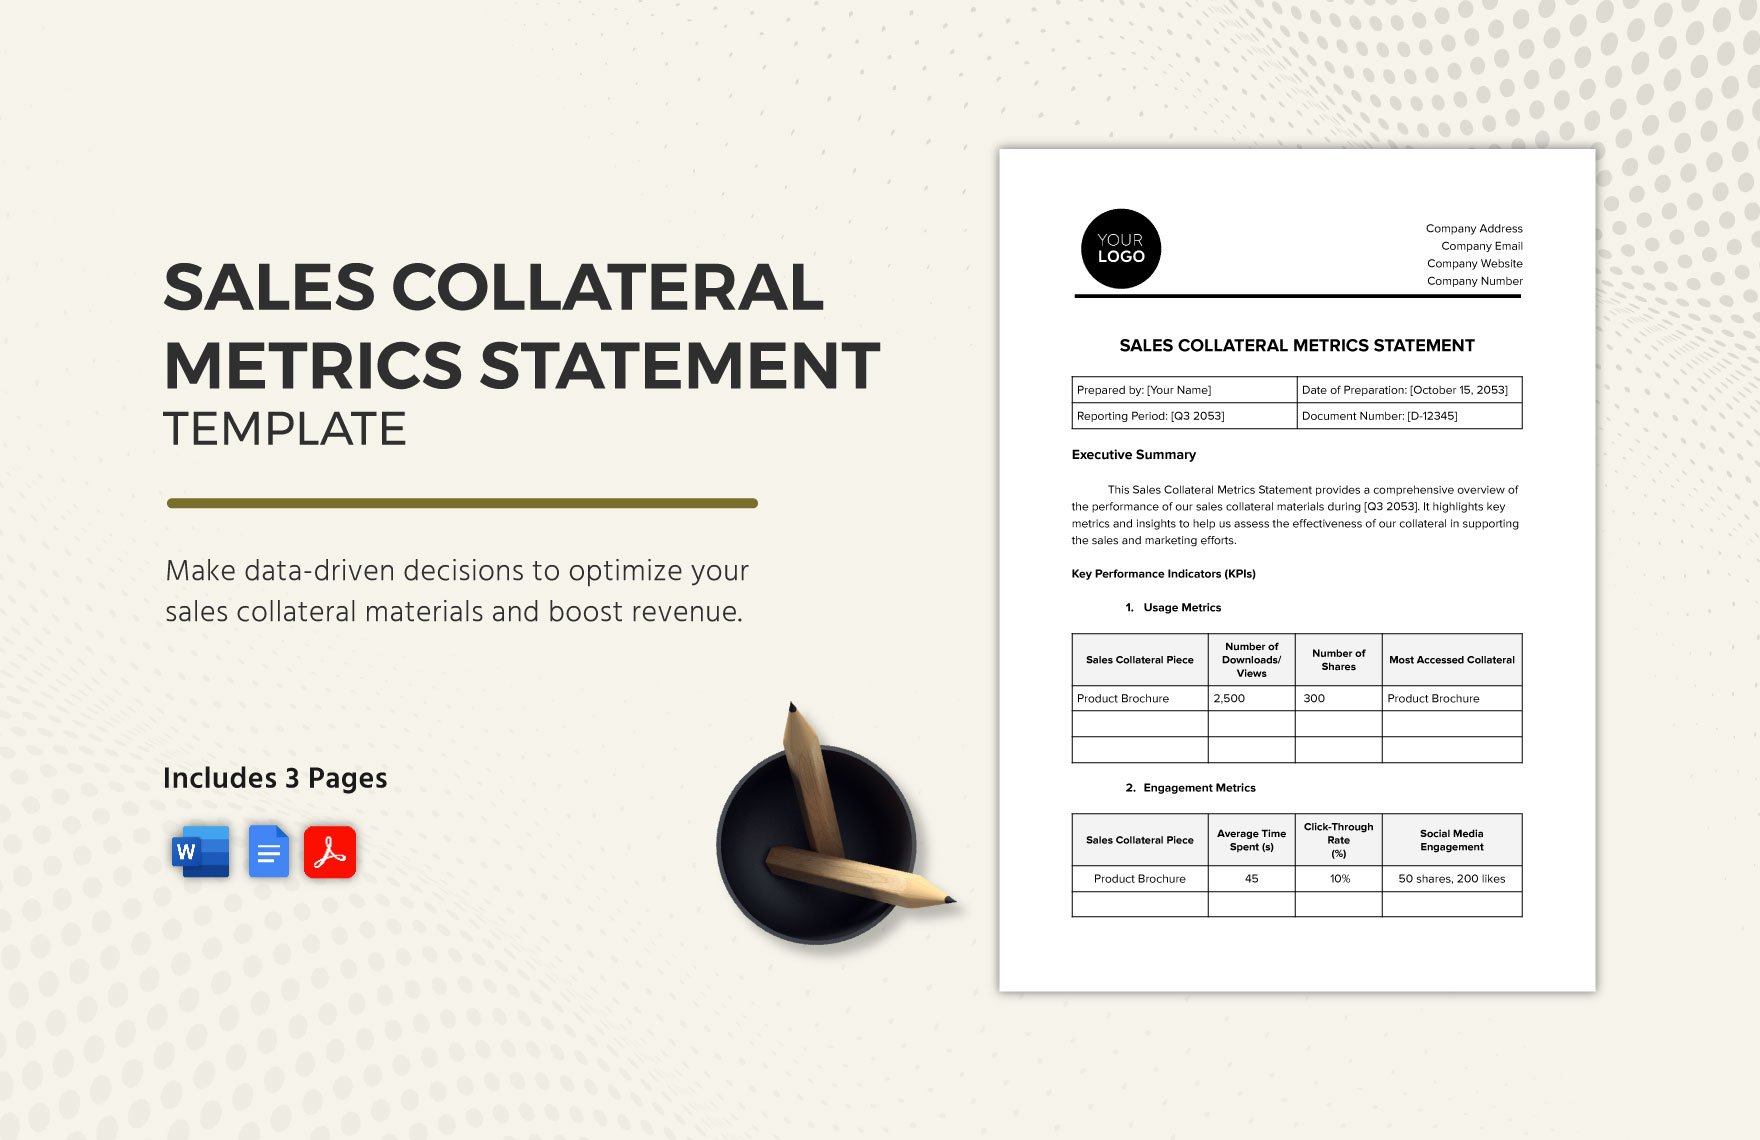 Sales Collateral Metrics Statement Template in Word, Google Docs, PDF